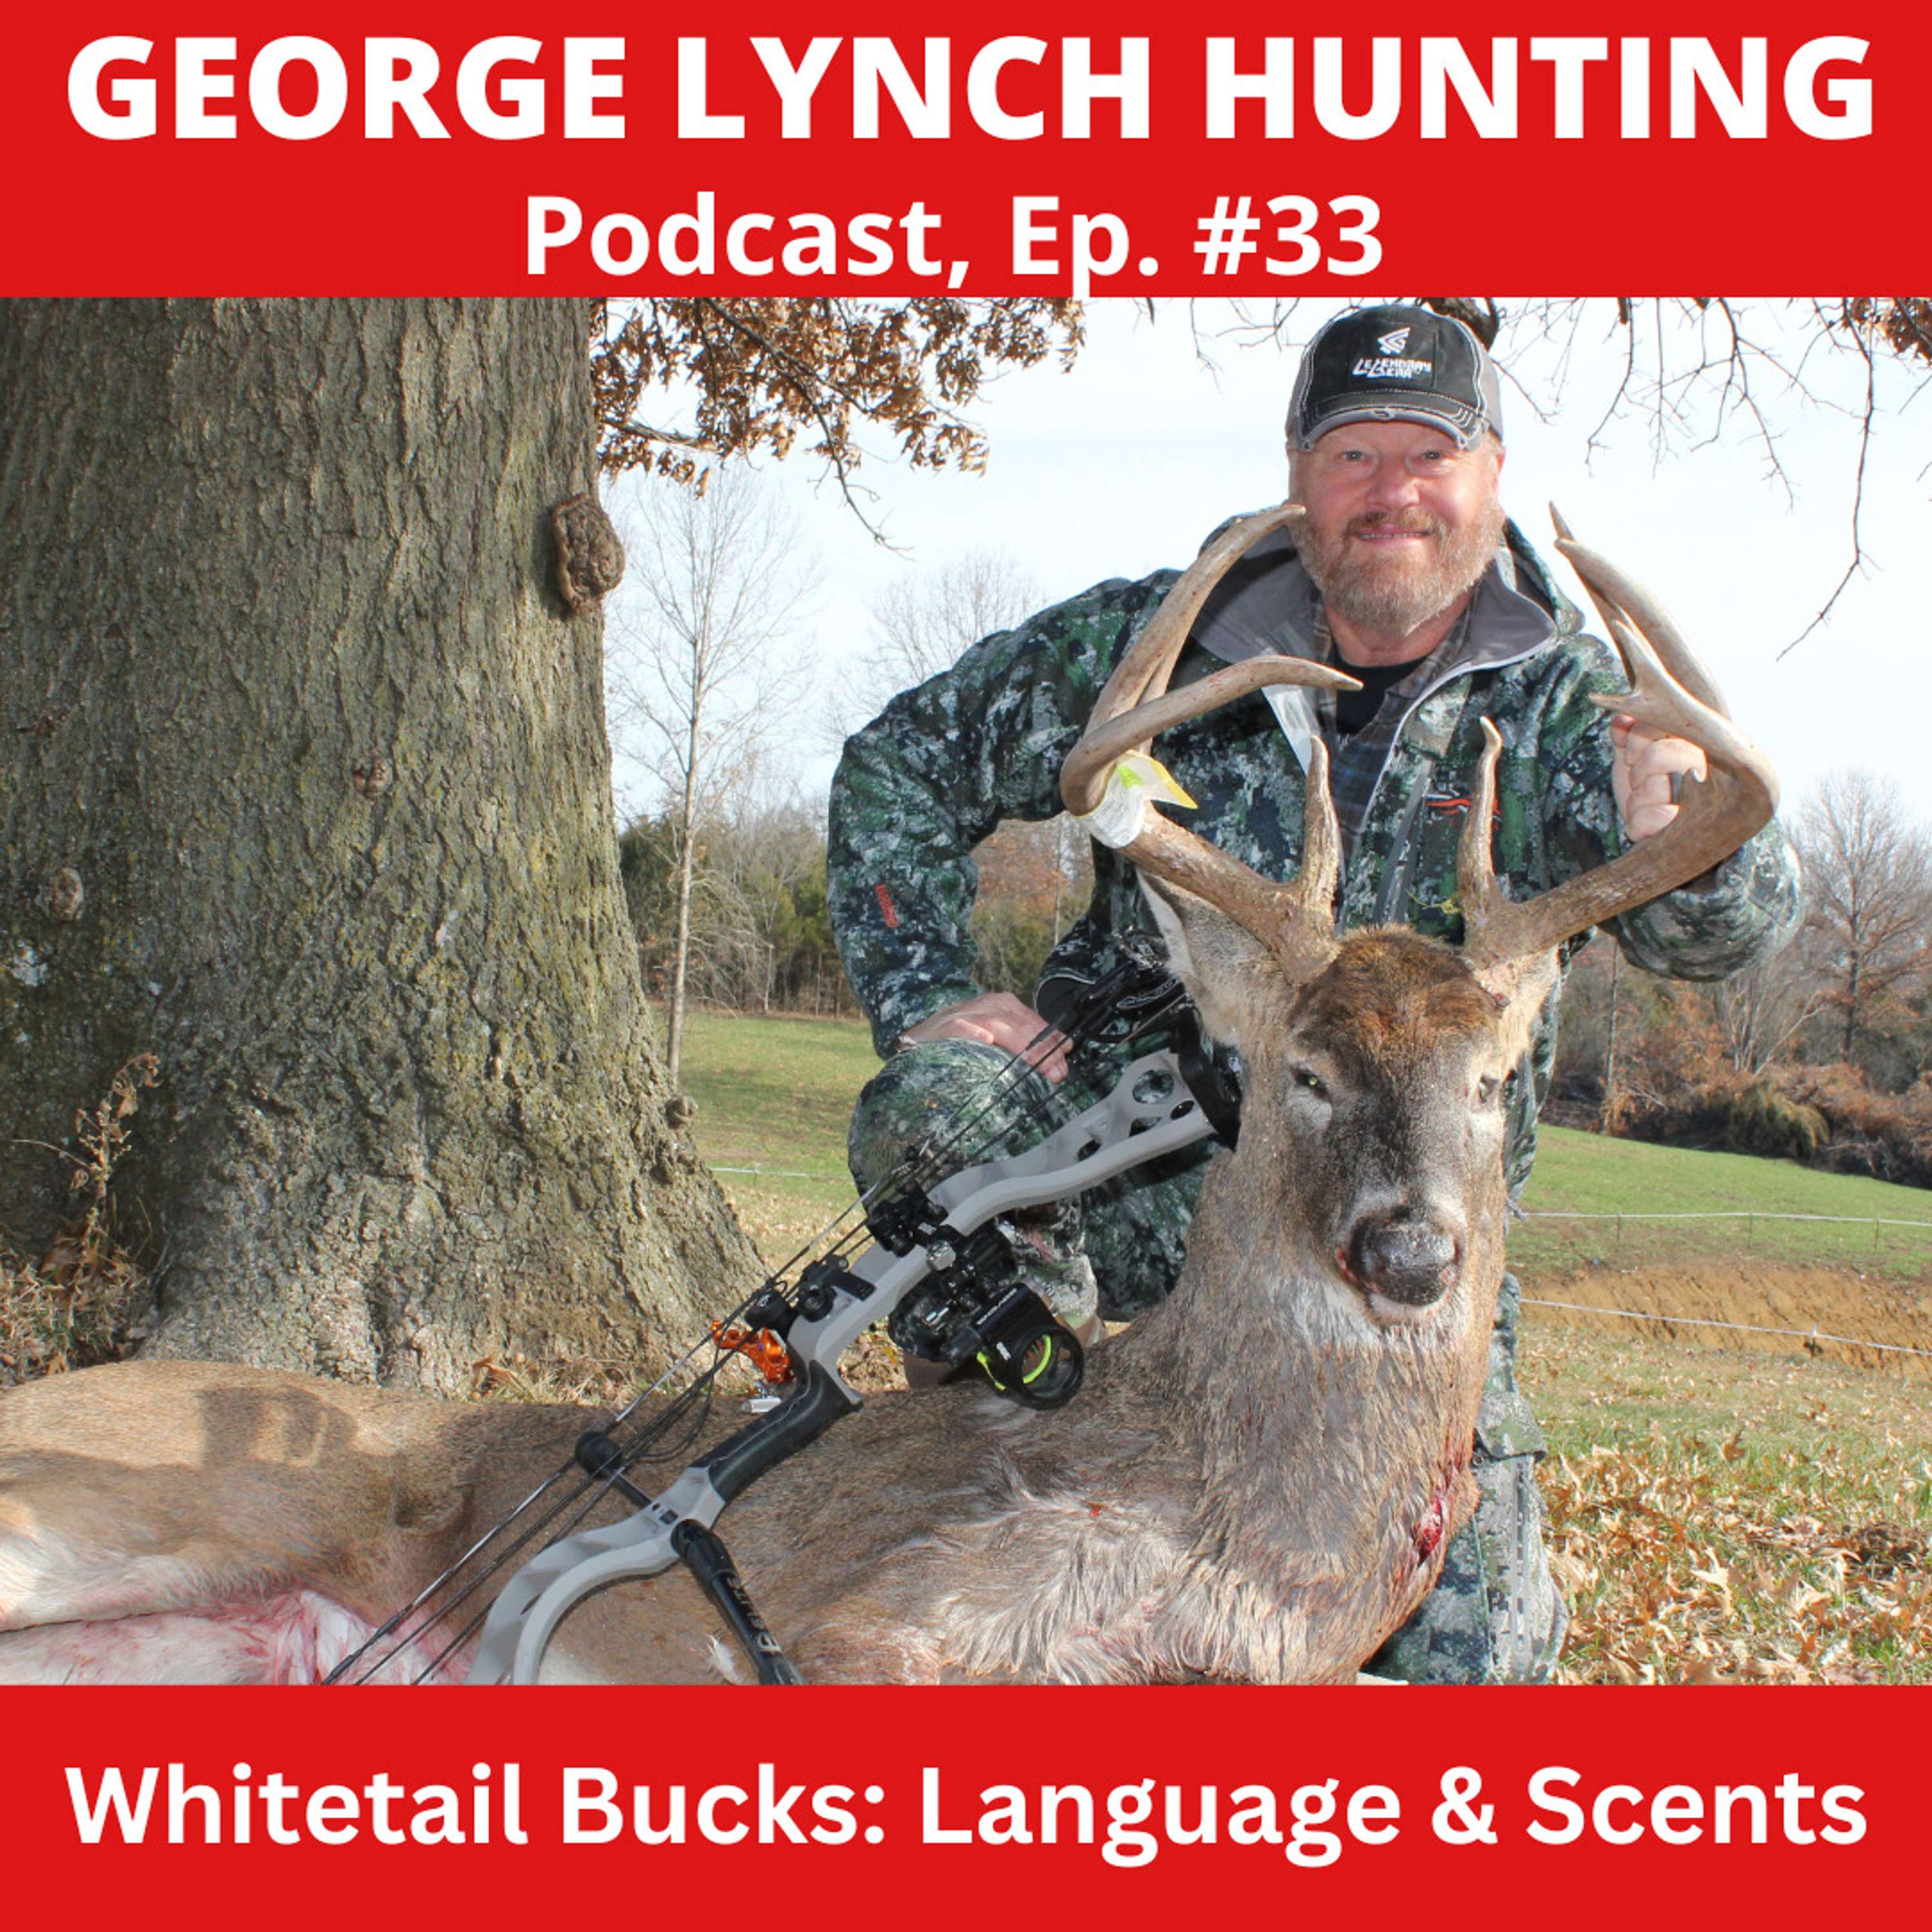 WHITETAIL BUCKS:  LANGUAGE & SCENTS by GEORGE LYNCH